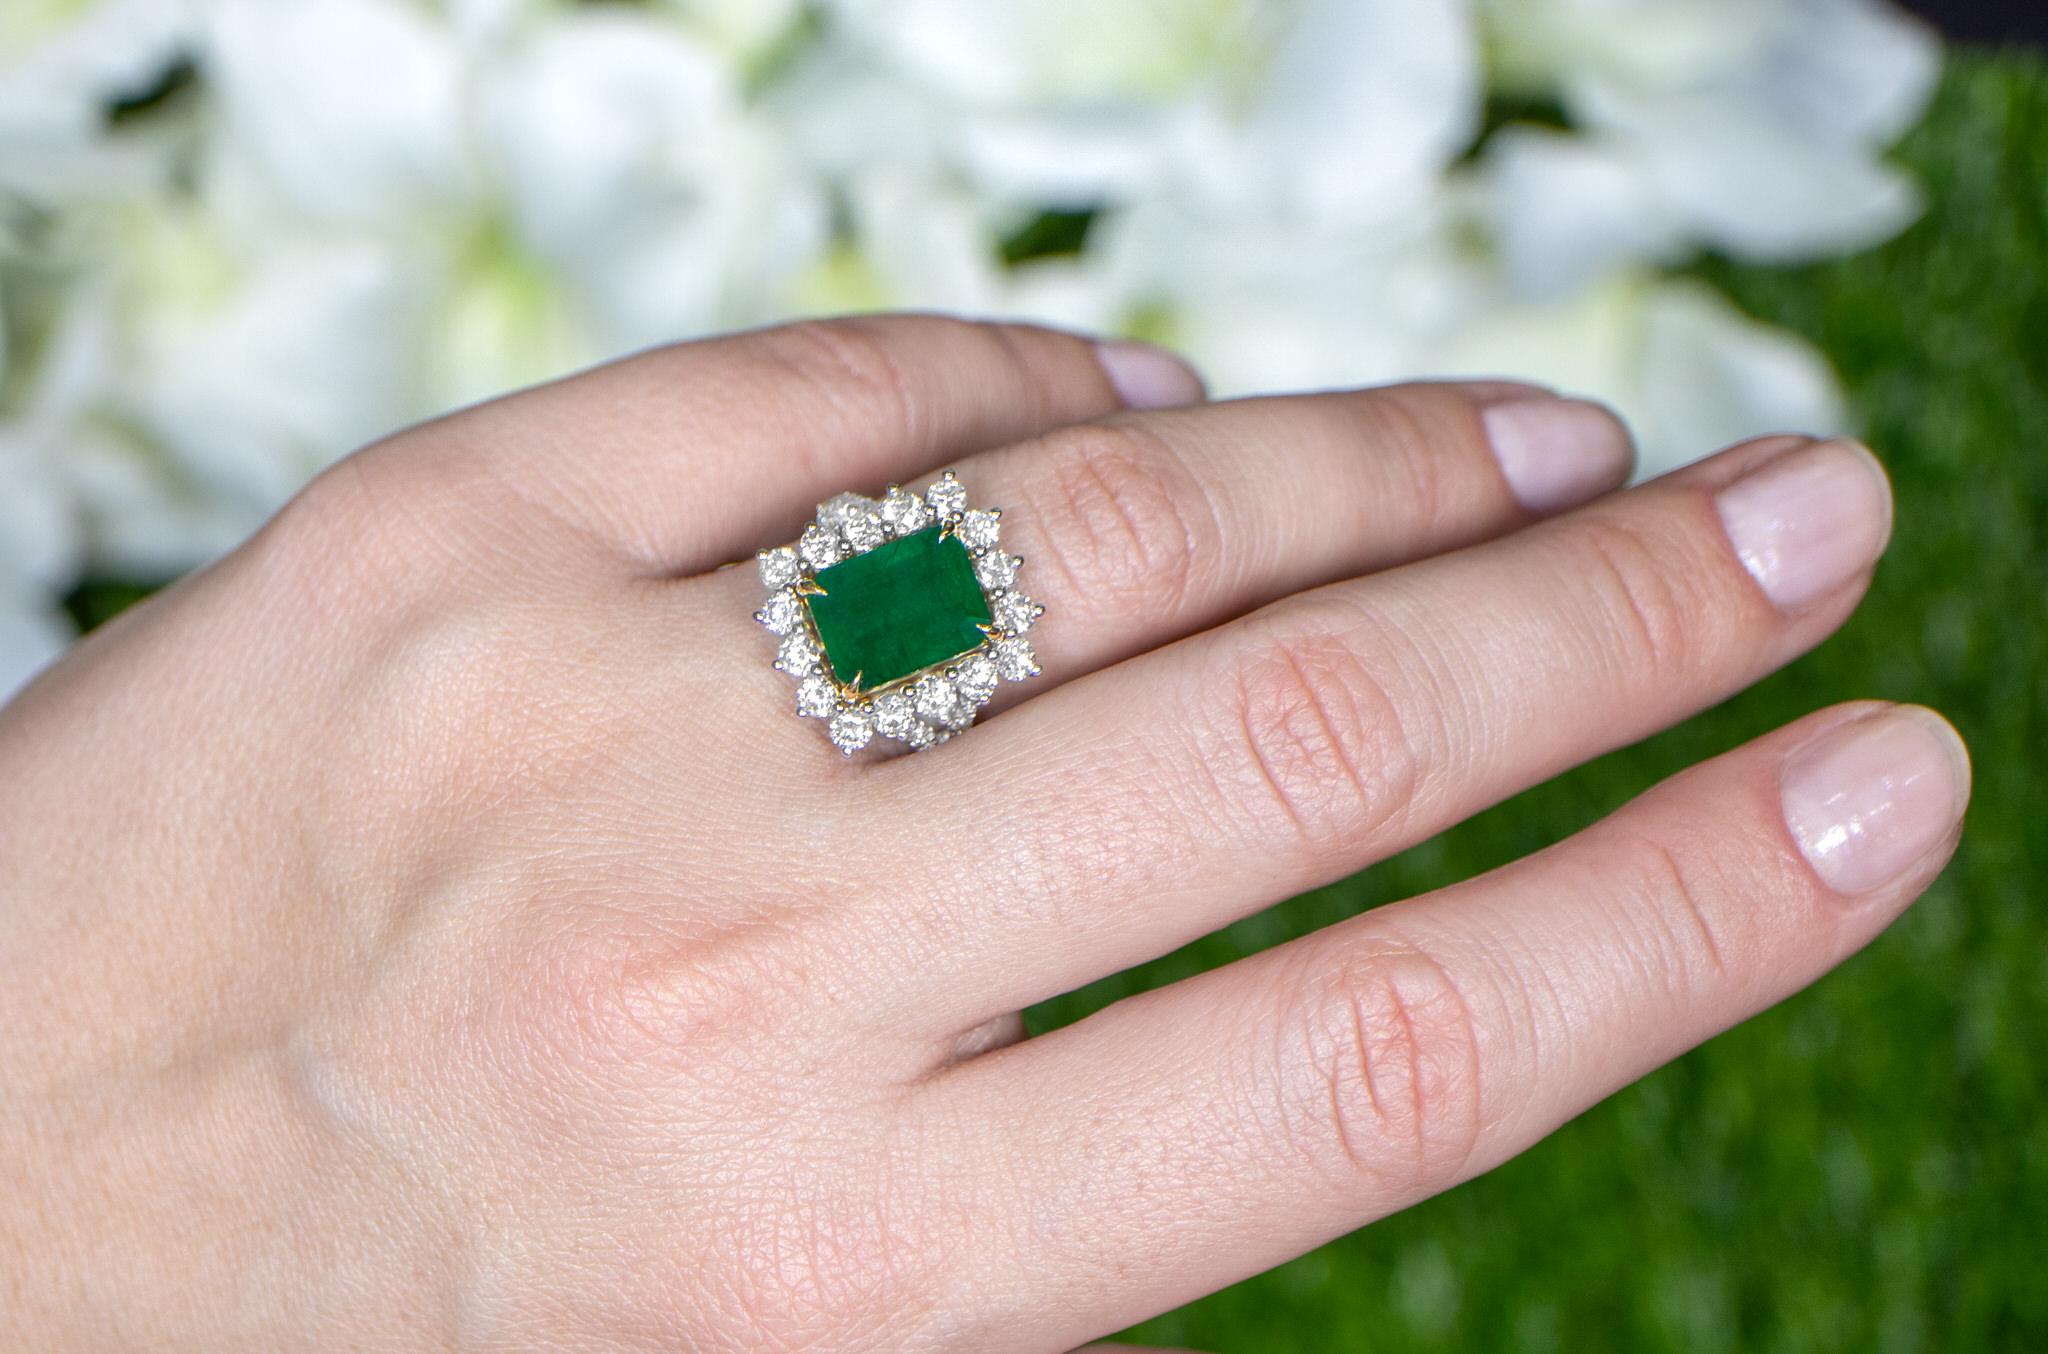 Emerald Cut Emerald Ring With Round Diamond Halo 6.39 Carats 18K Gold For Sale